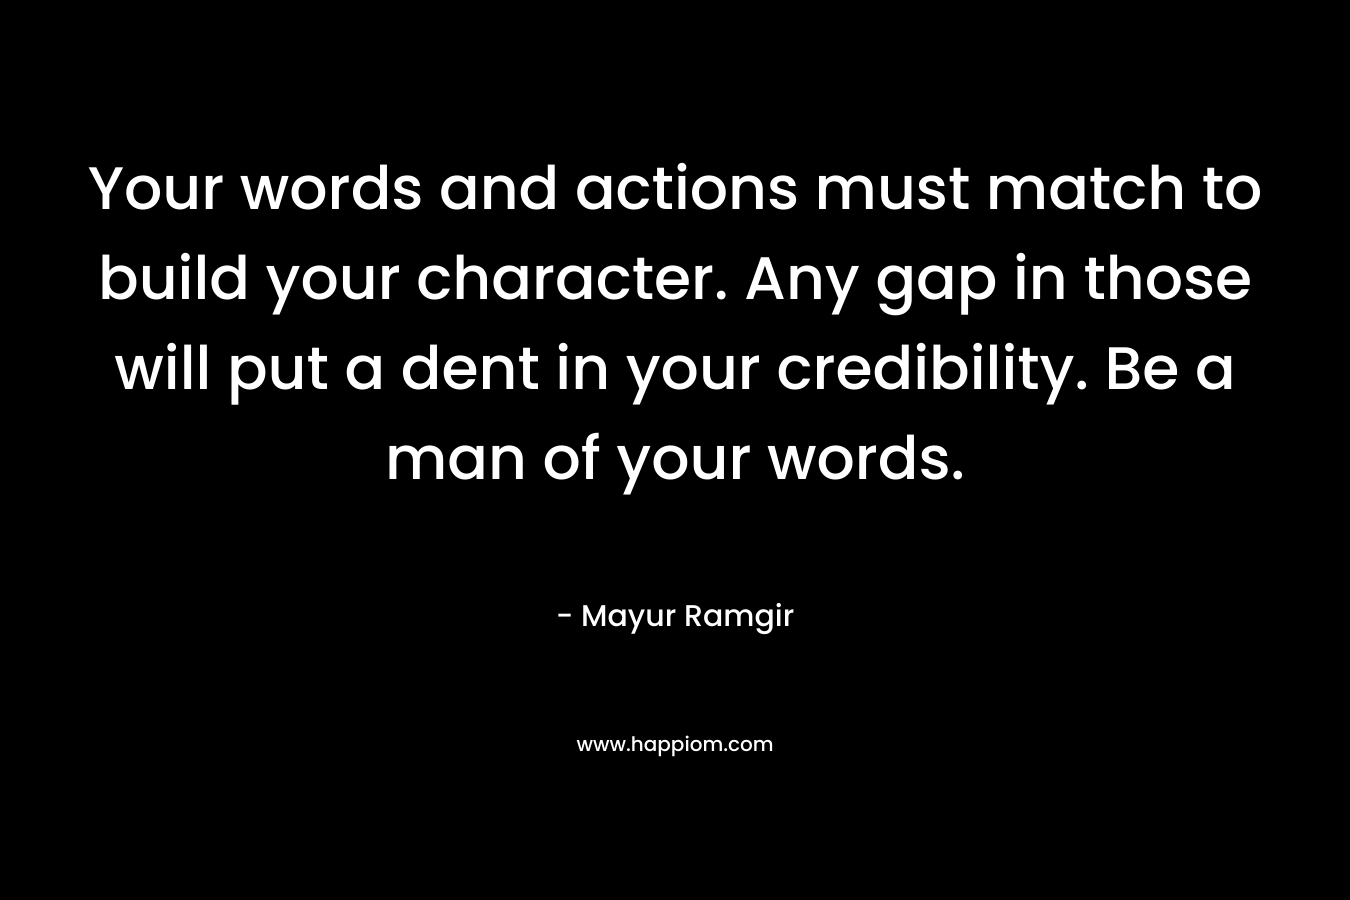 Your words and actions must match to build your character. Any gap in those will put a dent in your credibility. Be a man of your words. – Mayur Ramgir